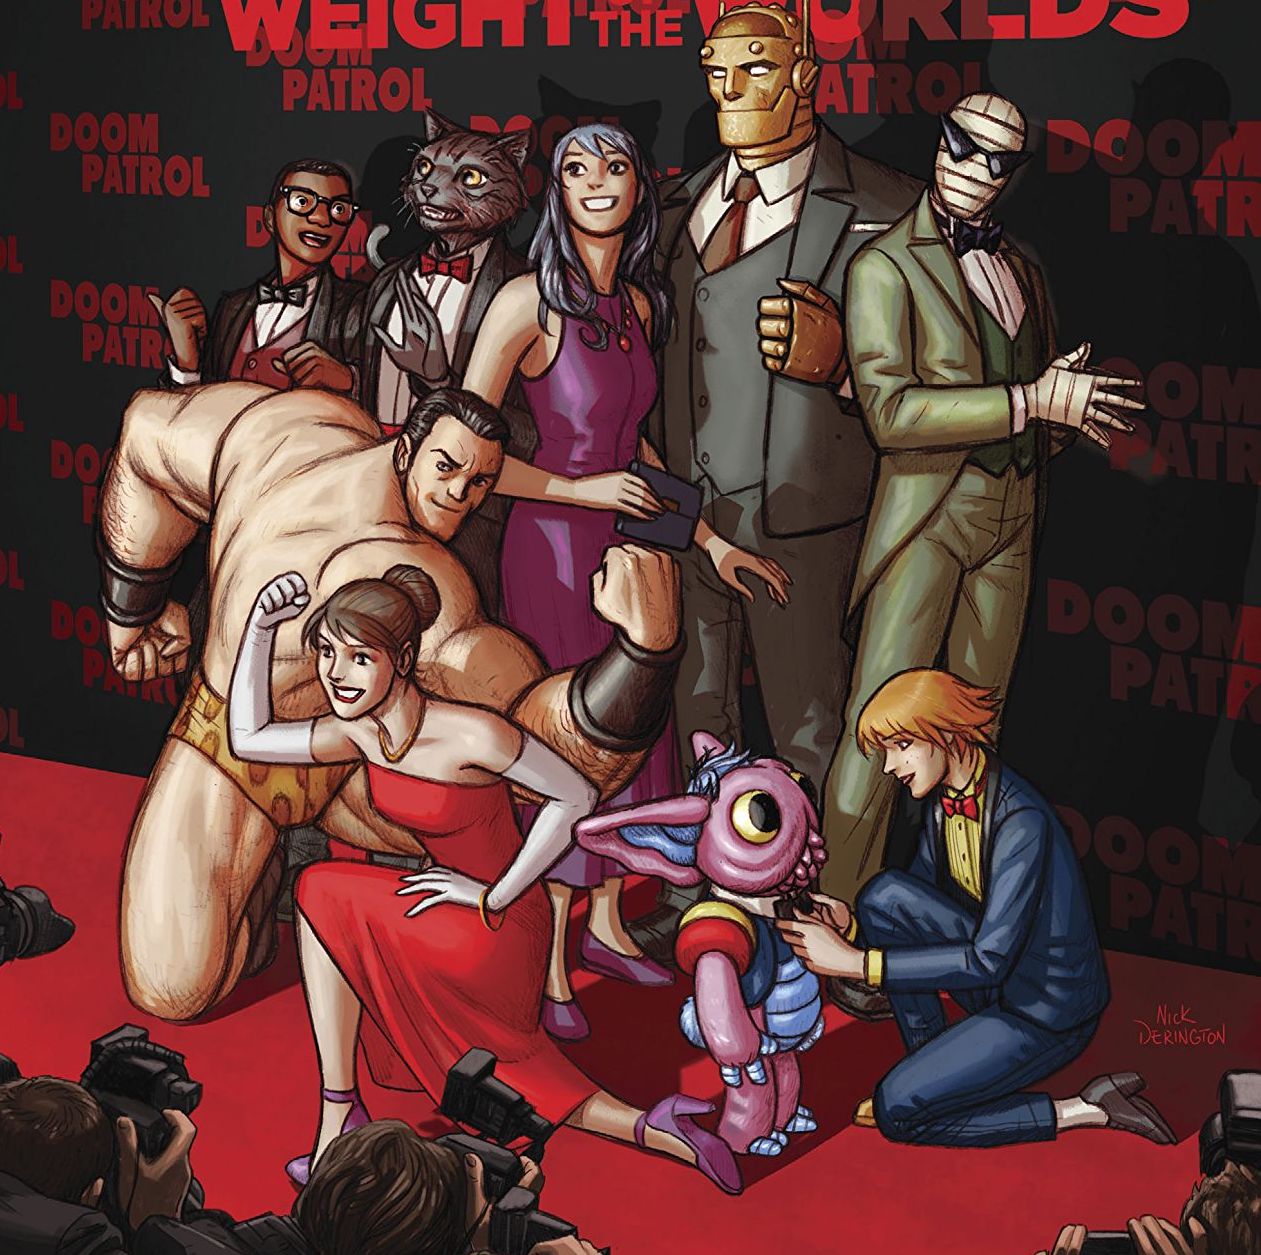 Doom Patrol: Weight of the Worlds #2 review